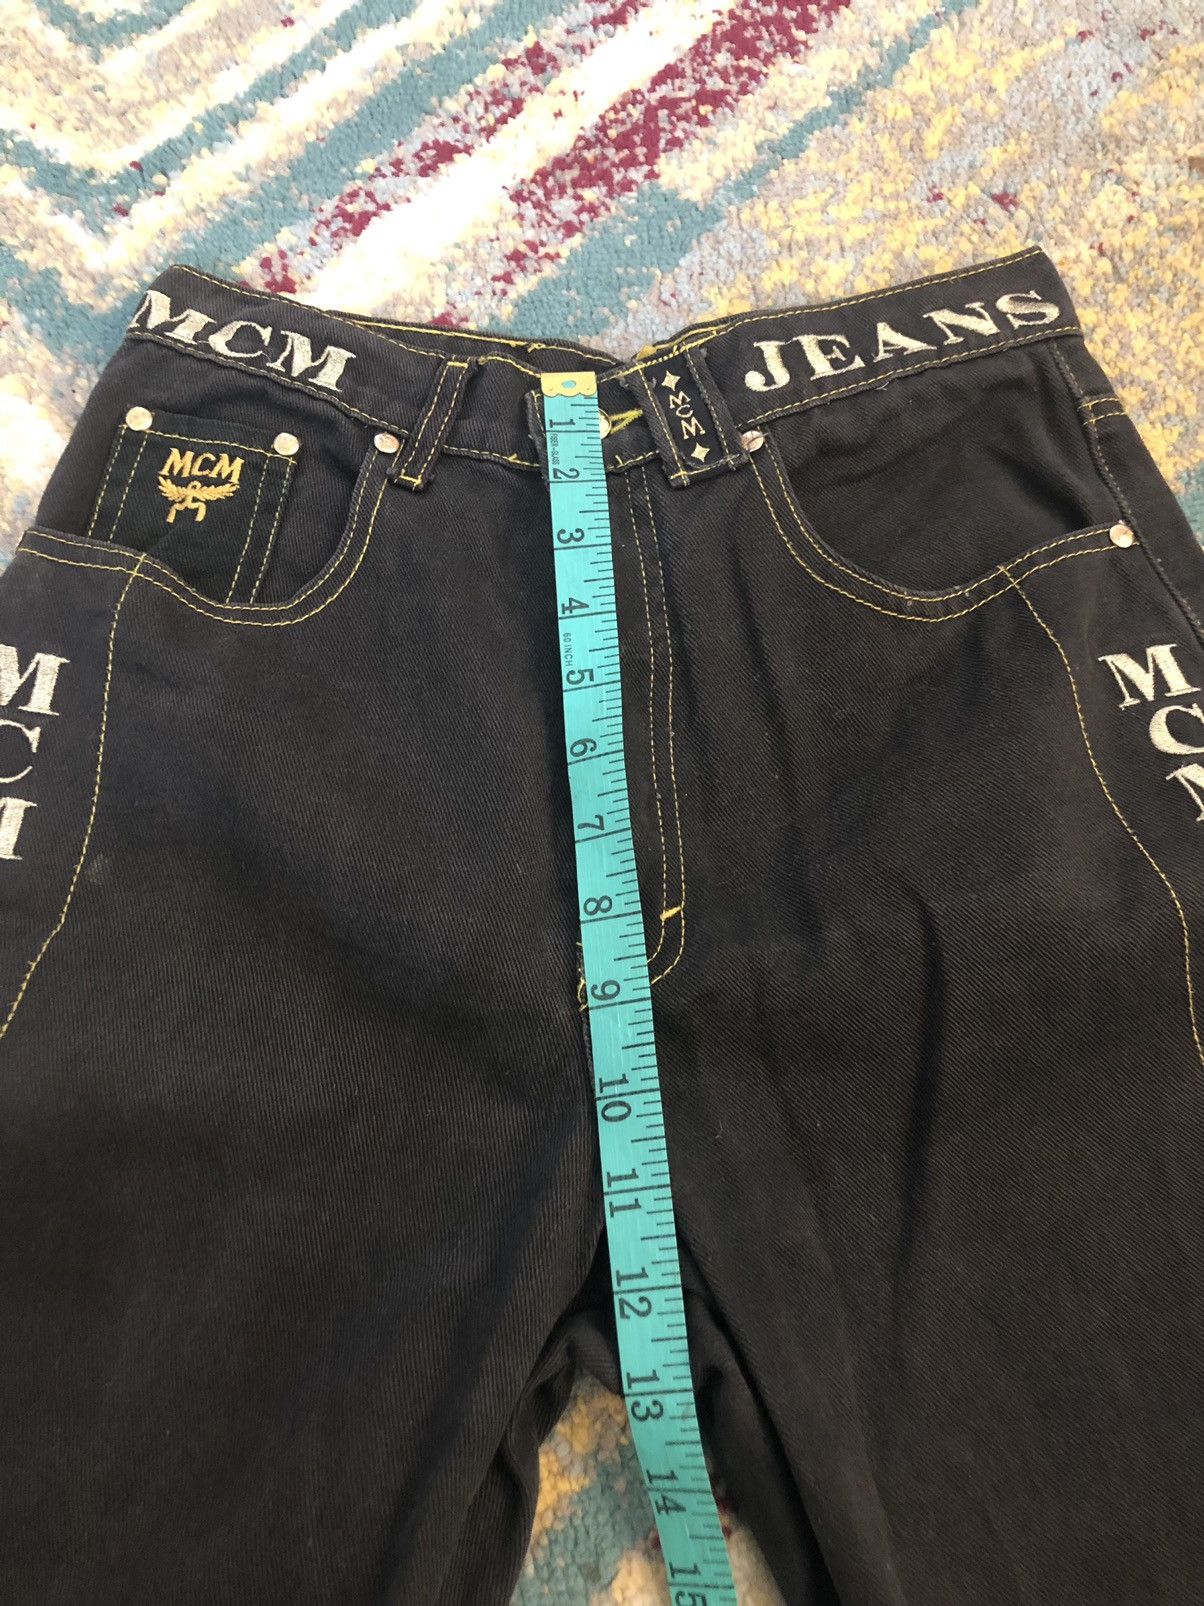 Vintage MCM Jeans Made Italy - 9